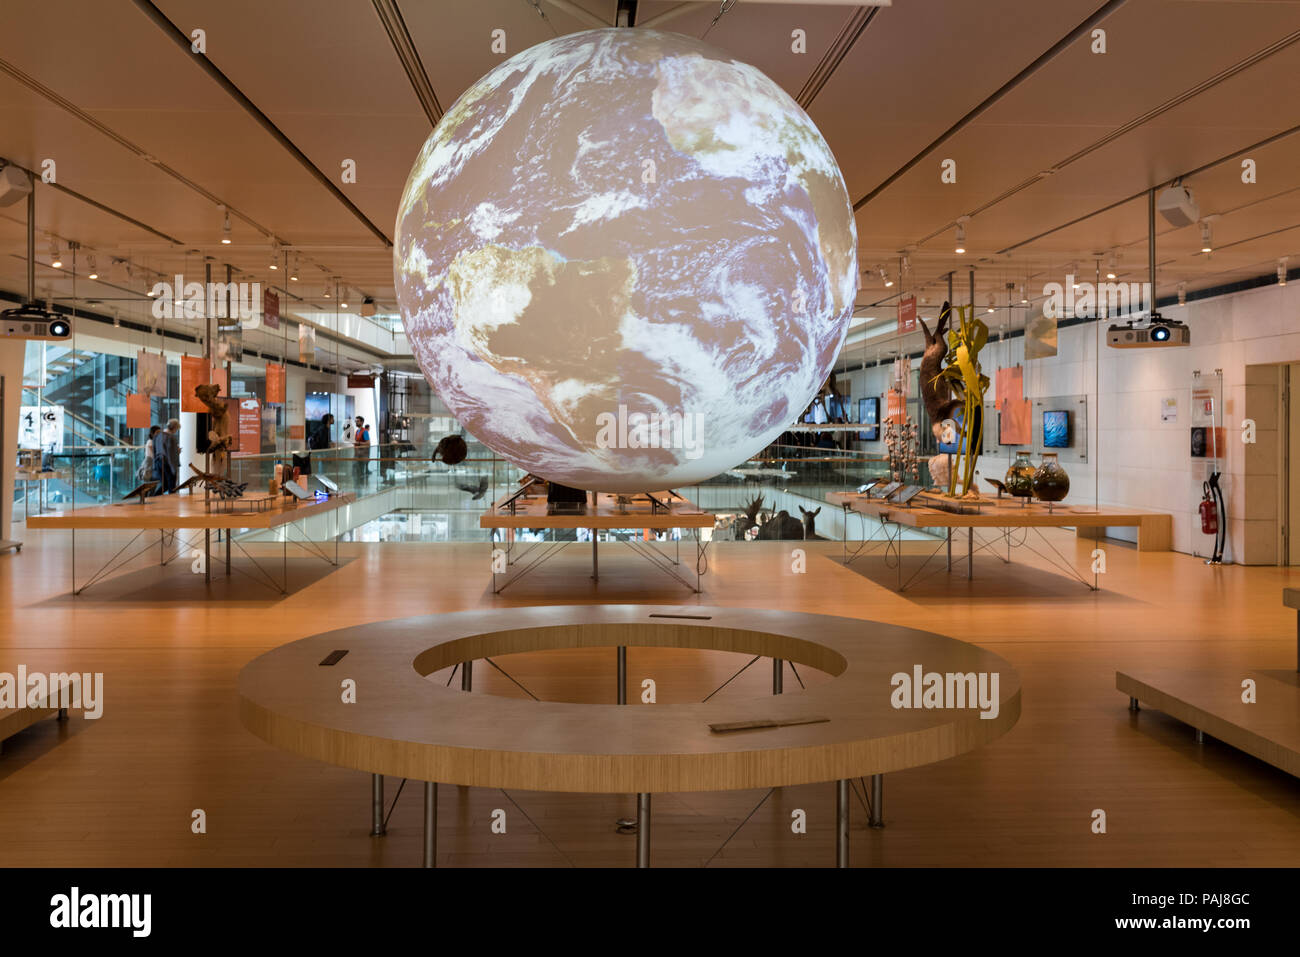 The exhibition spaces of the Museum of the Sciences of Trento in Trentino Alto Adige: the great interactive sphere of National Oceanic and Atmospheric Stock Photo